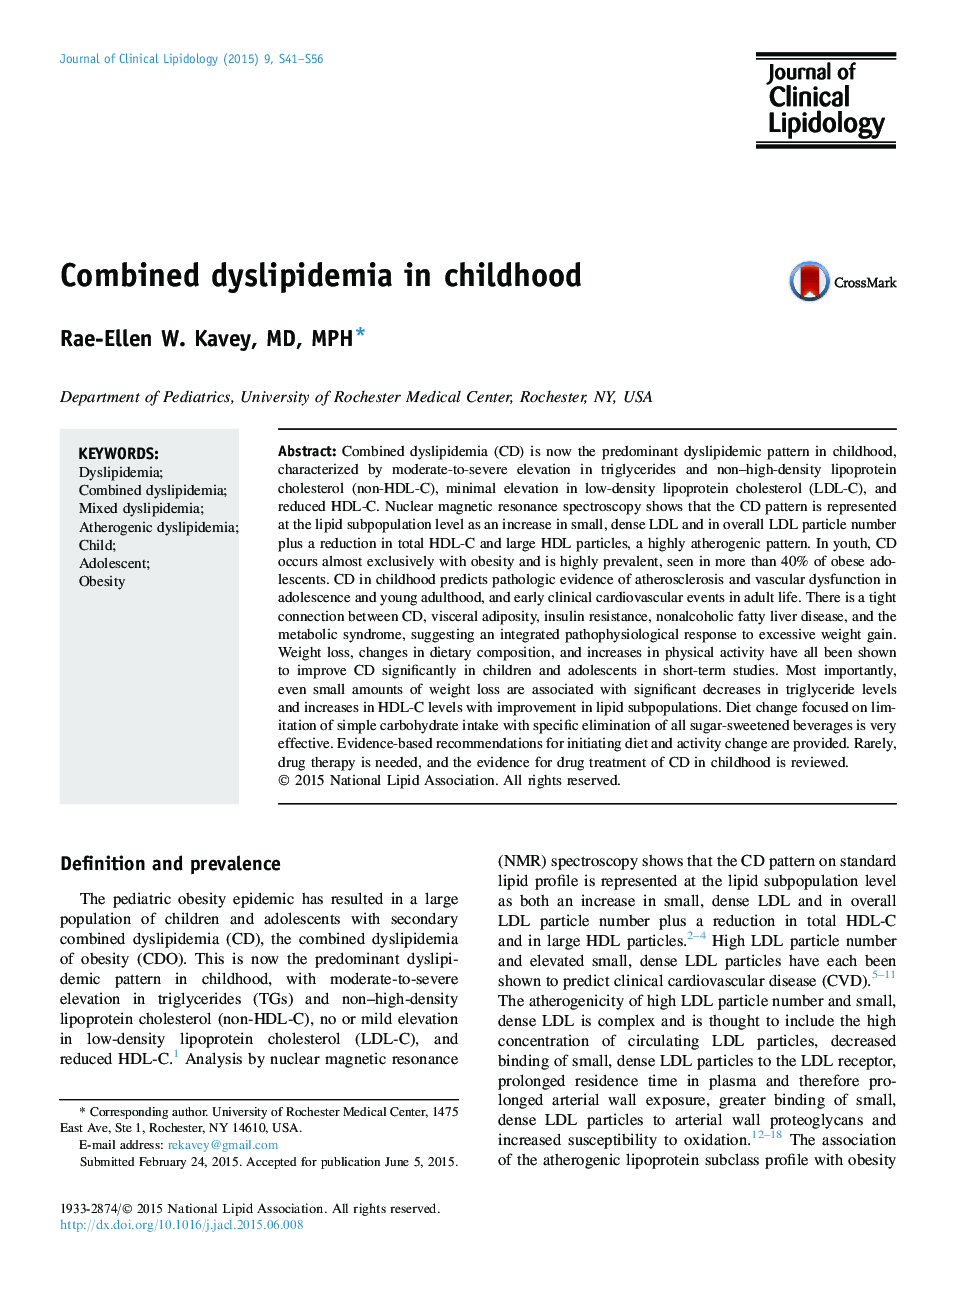 Combined dyslipidemia in childhood